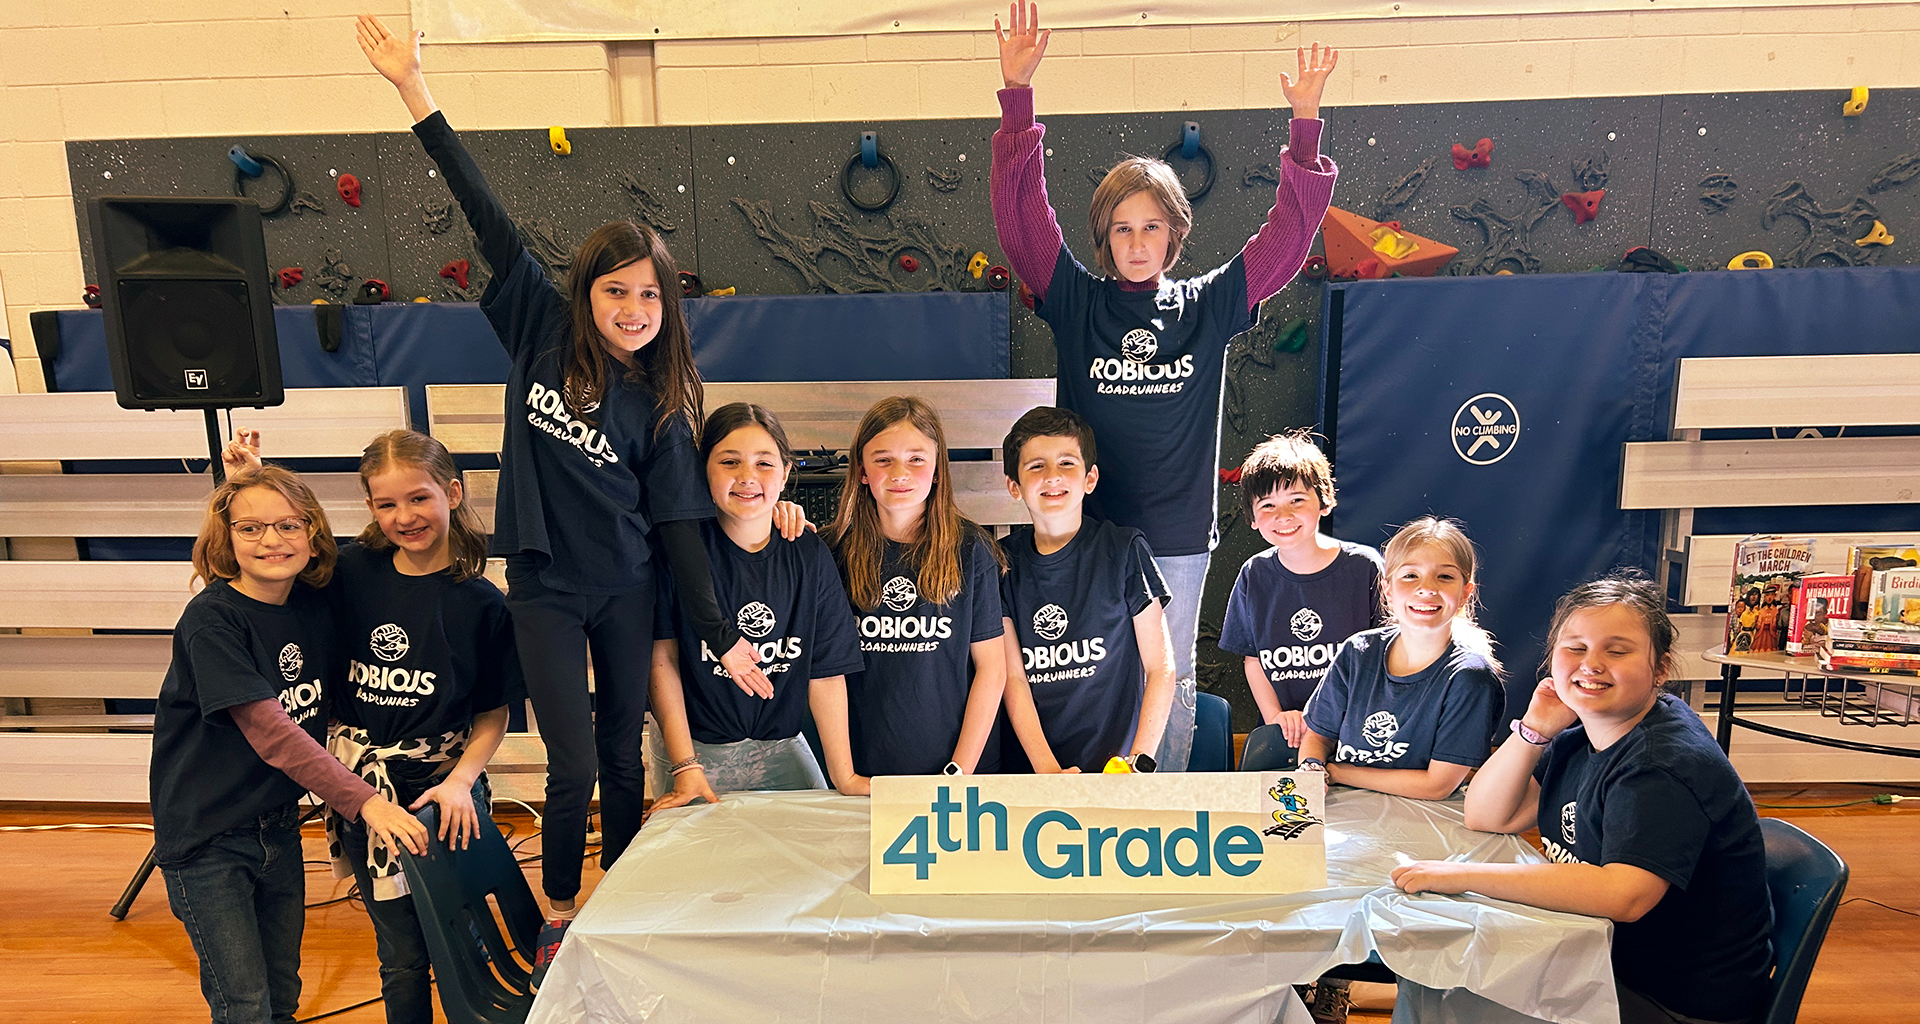 Students at a table with a fourth grade sign pose for a photo.